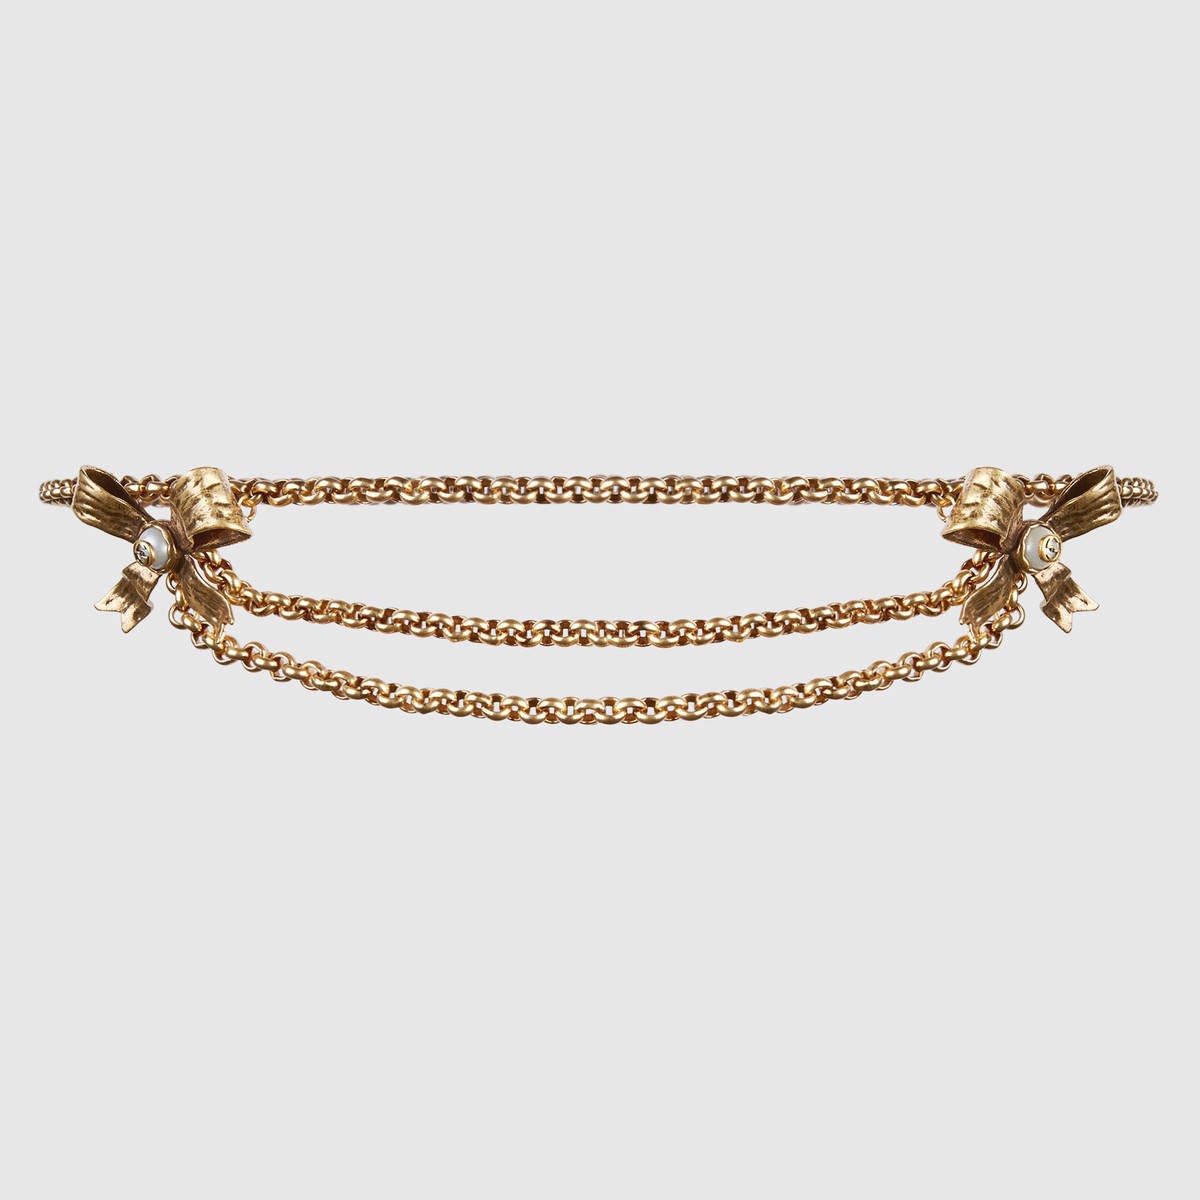 Gucci Chain Belt With Metal Bows - Antique Gold Toned Chain | ModeSens